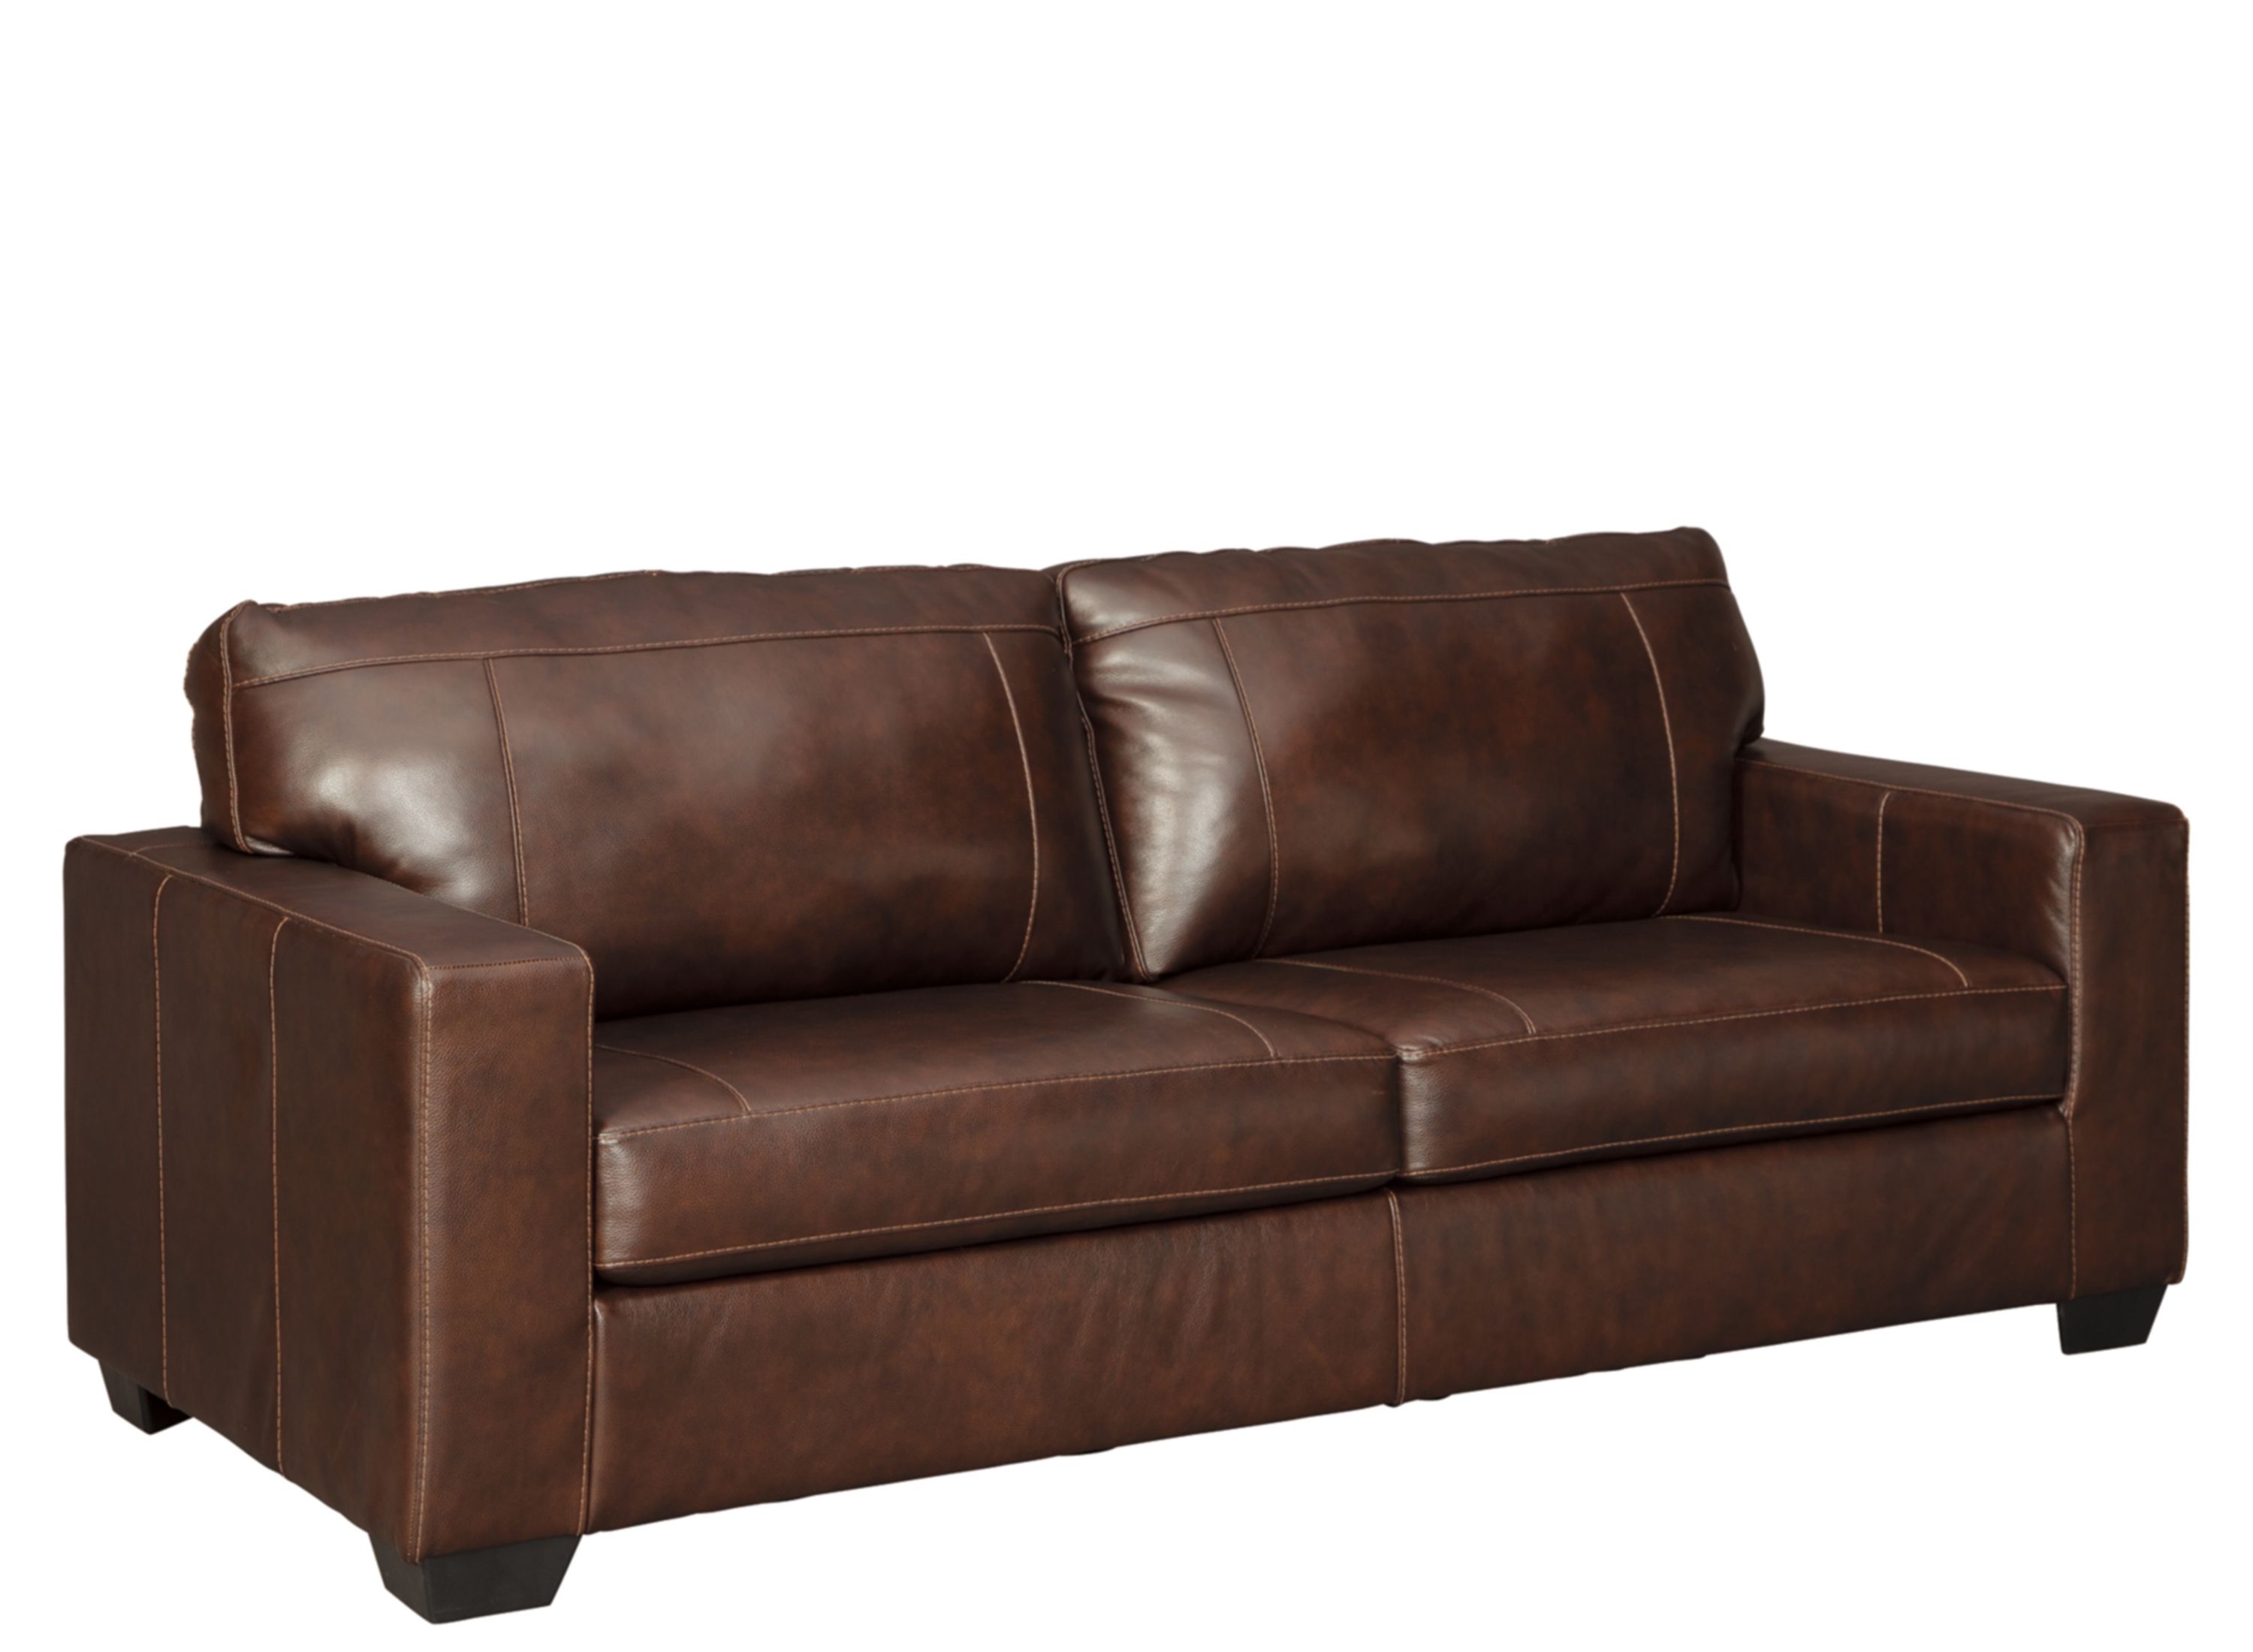 Best throw pillows for leather couch - At Home With The Barkers